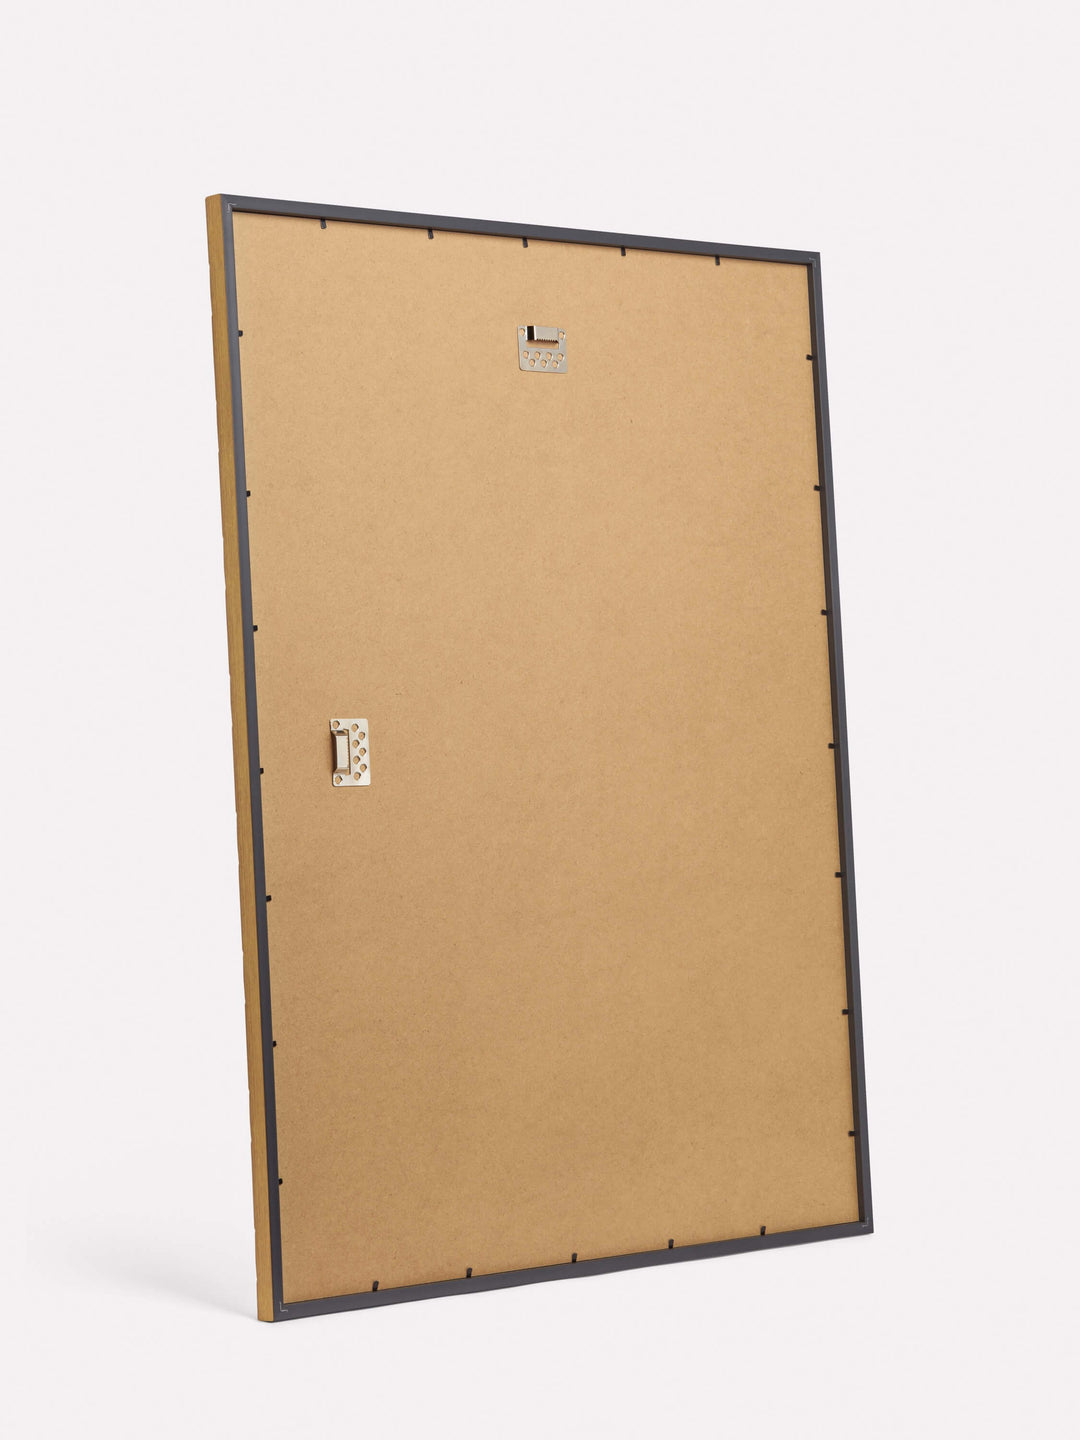 30x40-inch Bamboo Frame, Gold - Back view